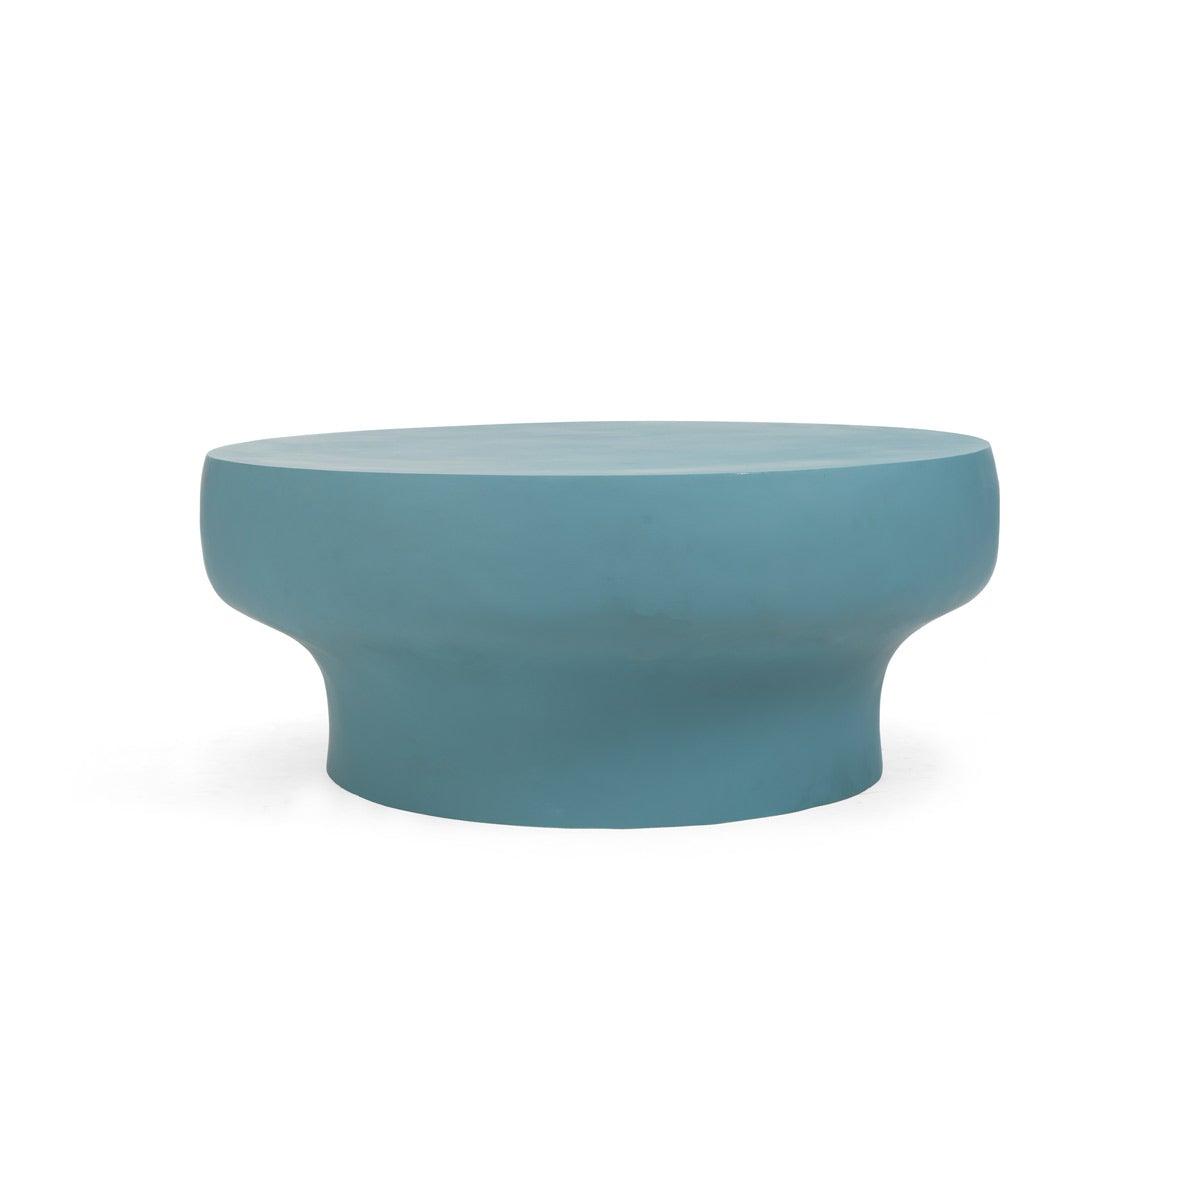 Ainsley Centre Table Teal - Home4u